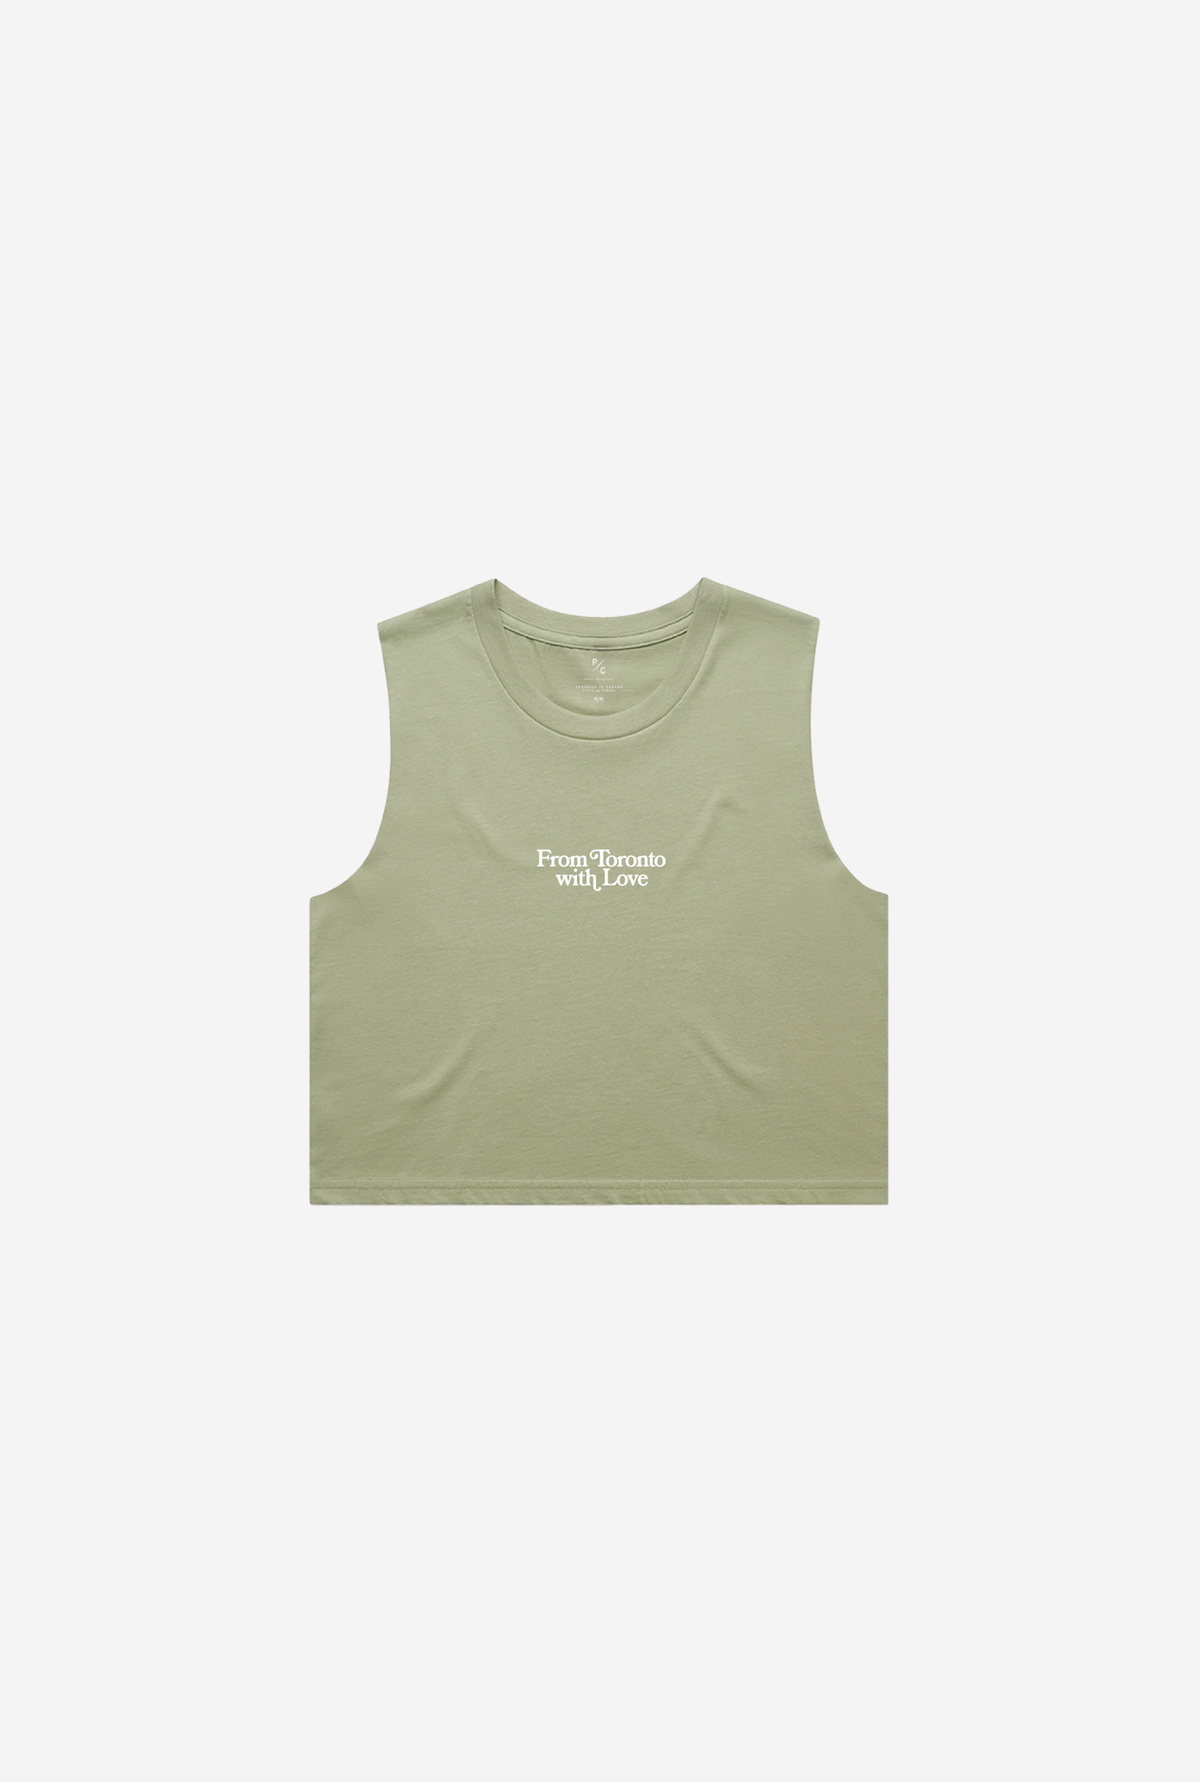 From Toronto With Love Women's Tank - Pistachio